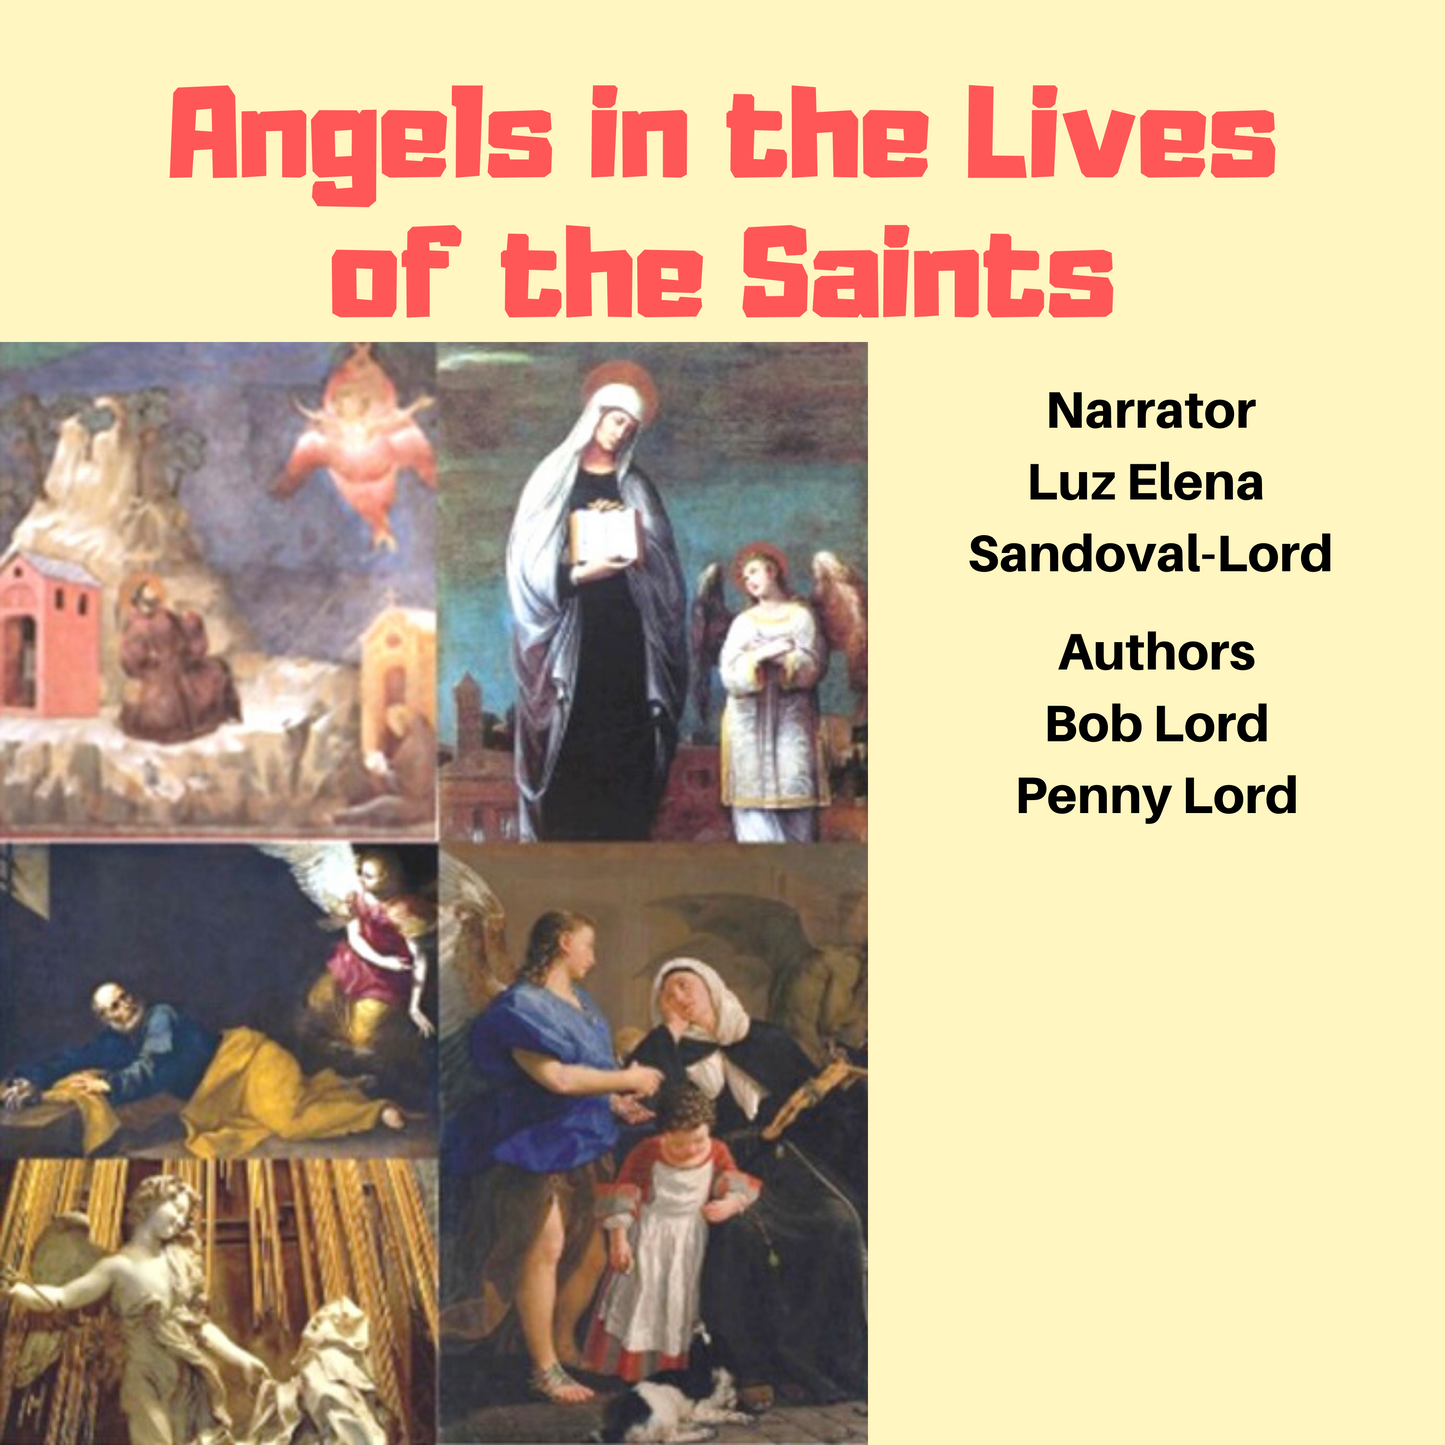 Lives of the Saints Miracles Visions and Angels Audiobooks - Bob and Penny Lord